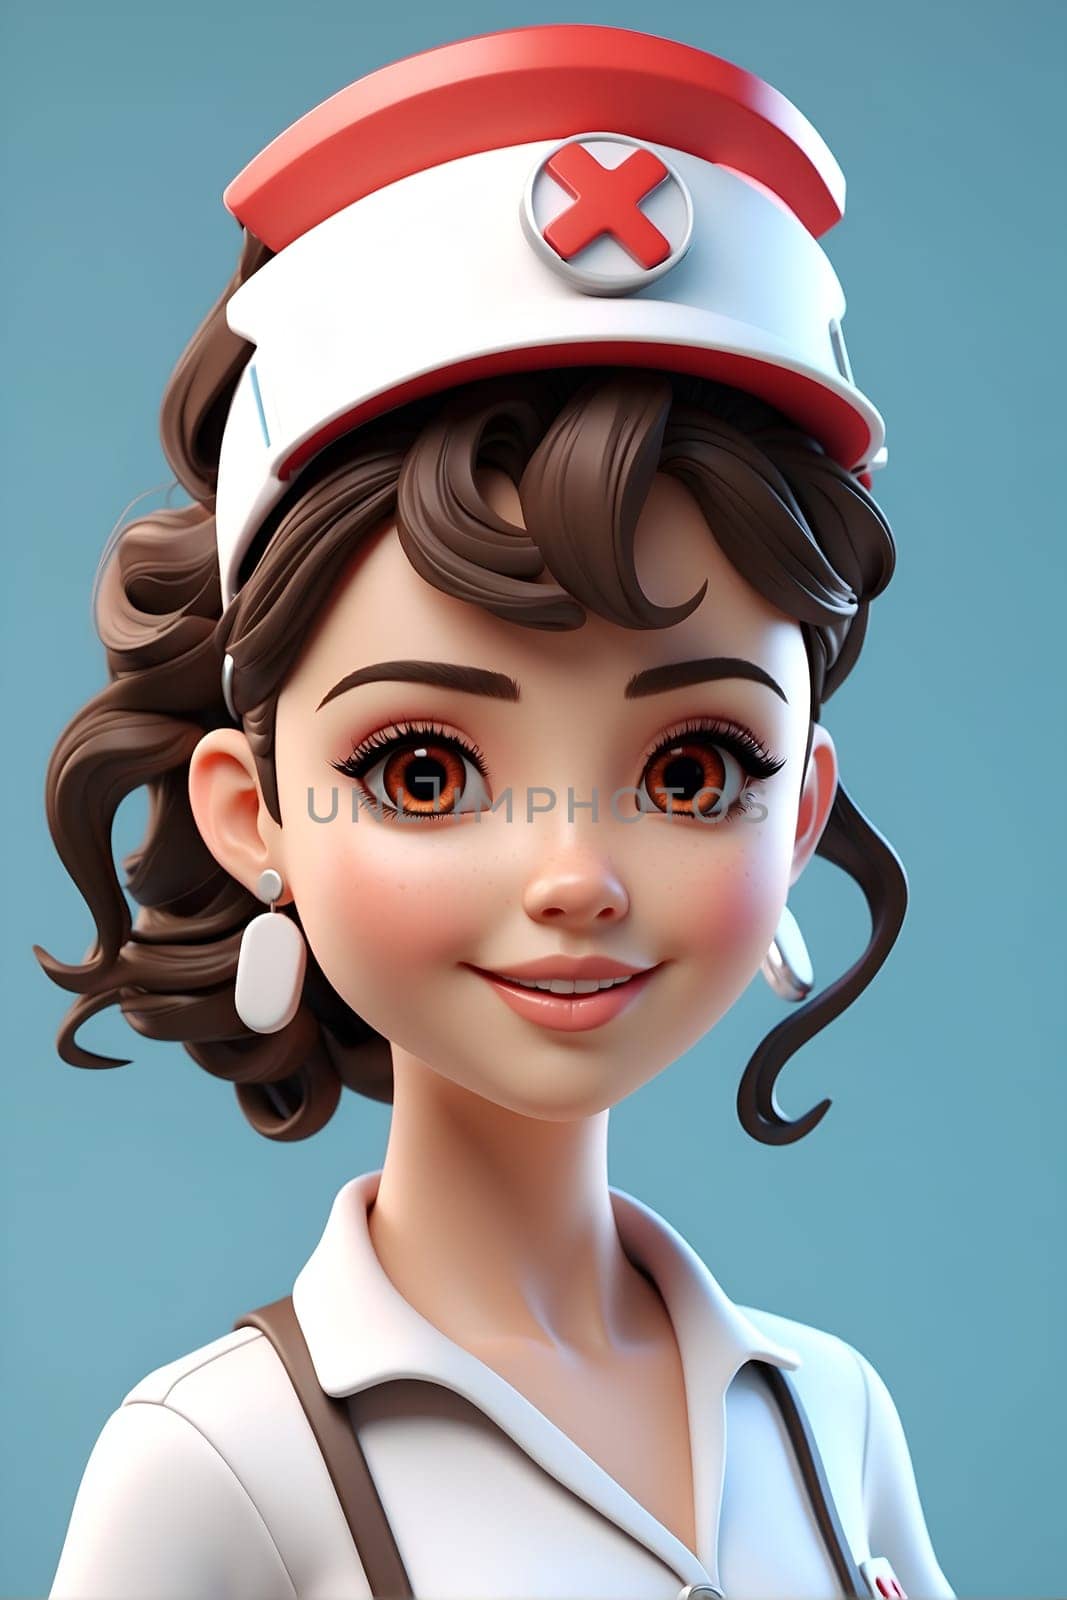 Cartoon Character in Nurses Hat - Smiling, Colorful, Illustration for Healthcare Education. Generative AI. by artofphoto